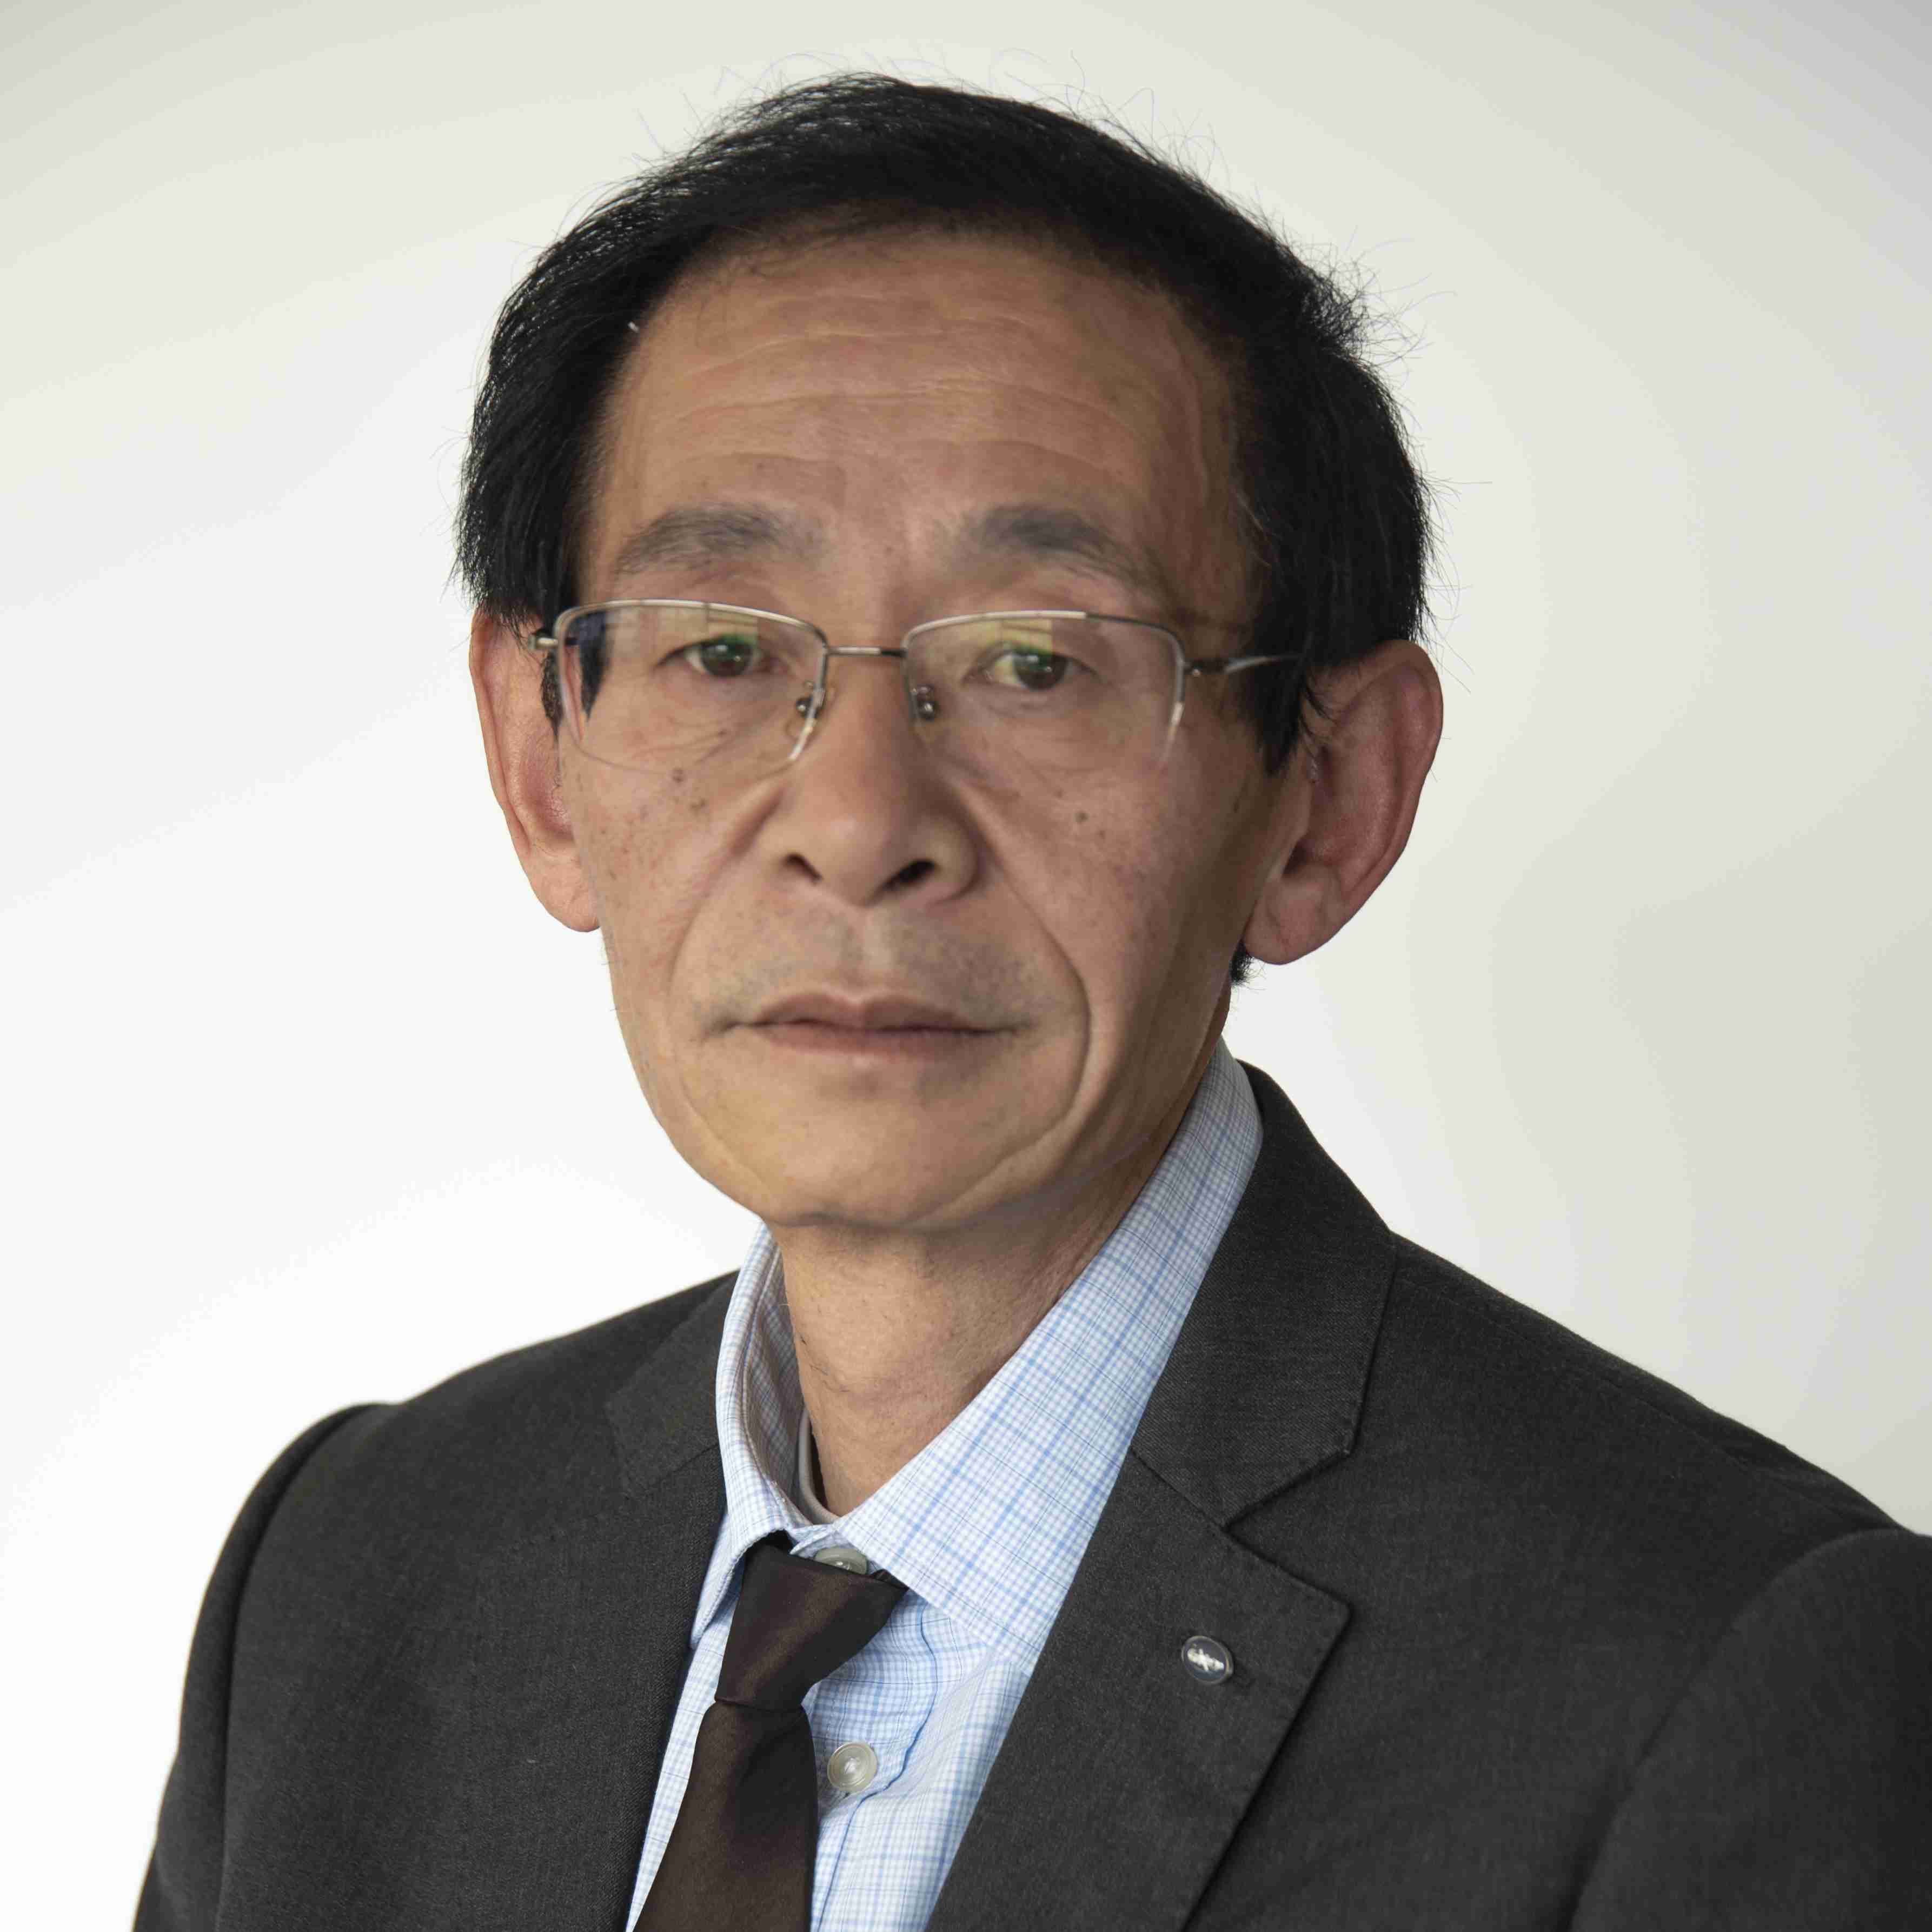 Profile image of Prof Min An